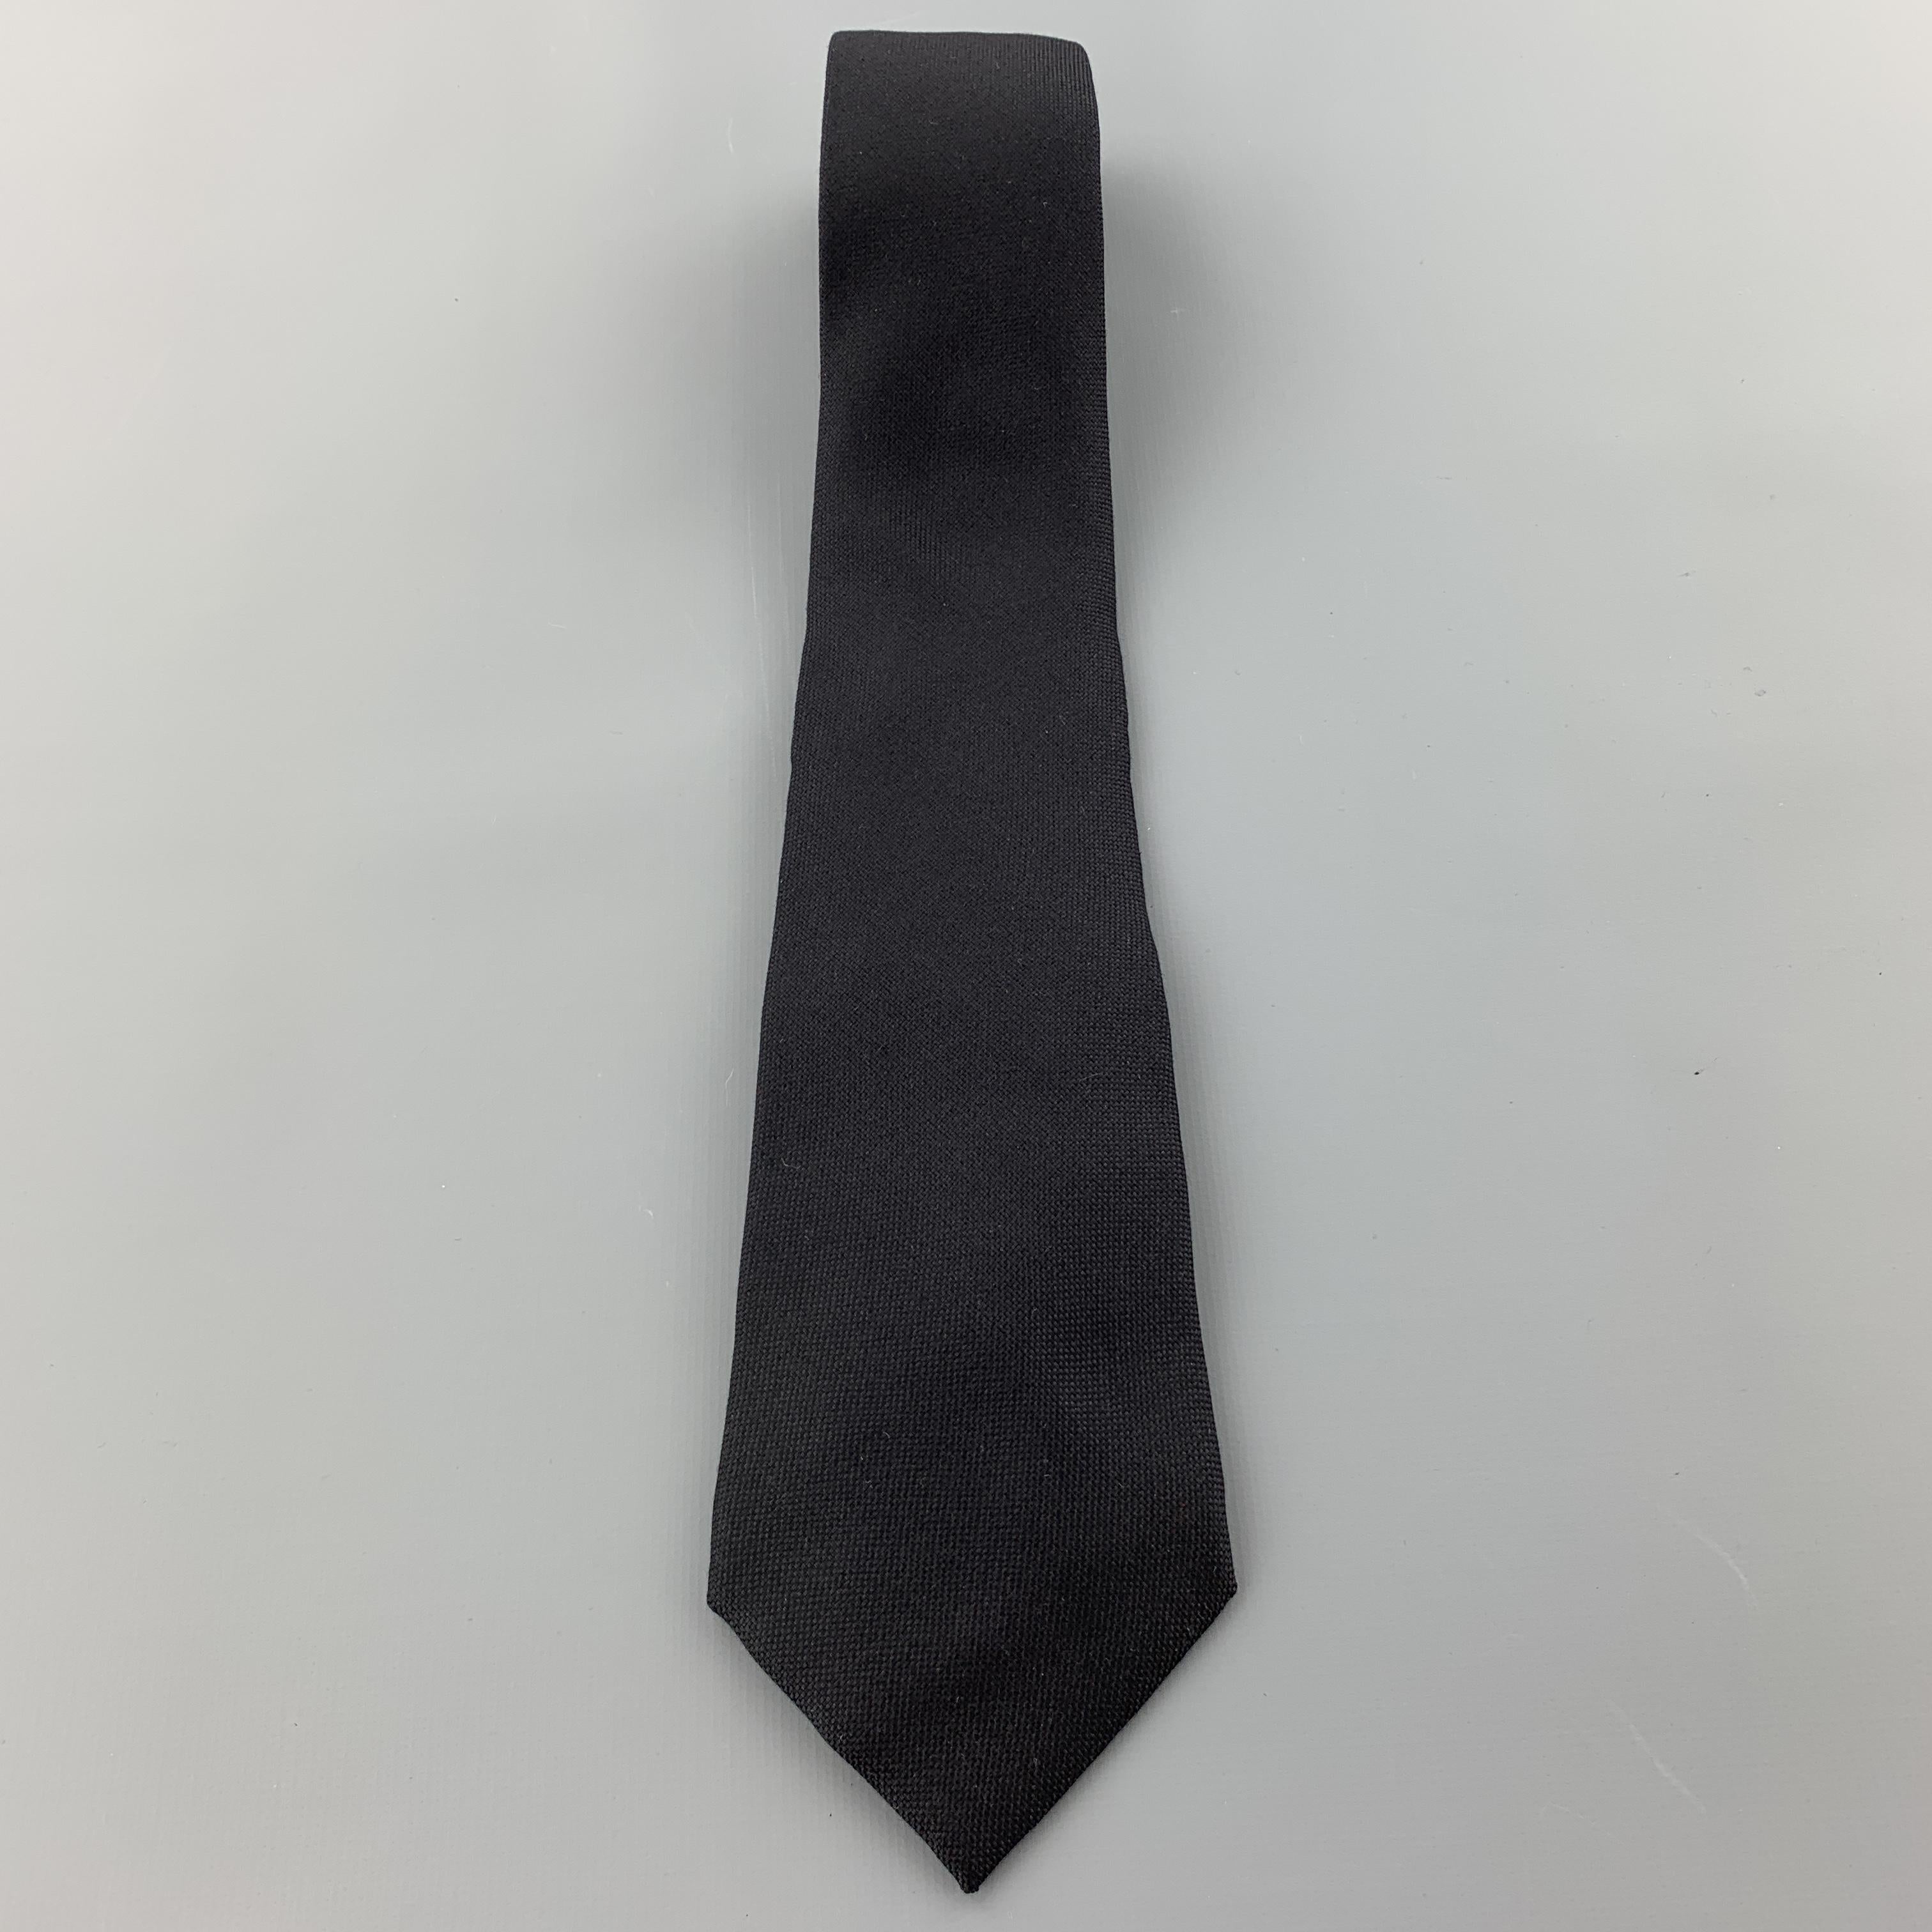 Vintage GIORGIO ARMANI Cravatte necktie comes in black silk with a woven texture throughout. Made in Italy.

Excellent Pre-Owned Condition.

Width: 3.5 in.  